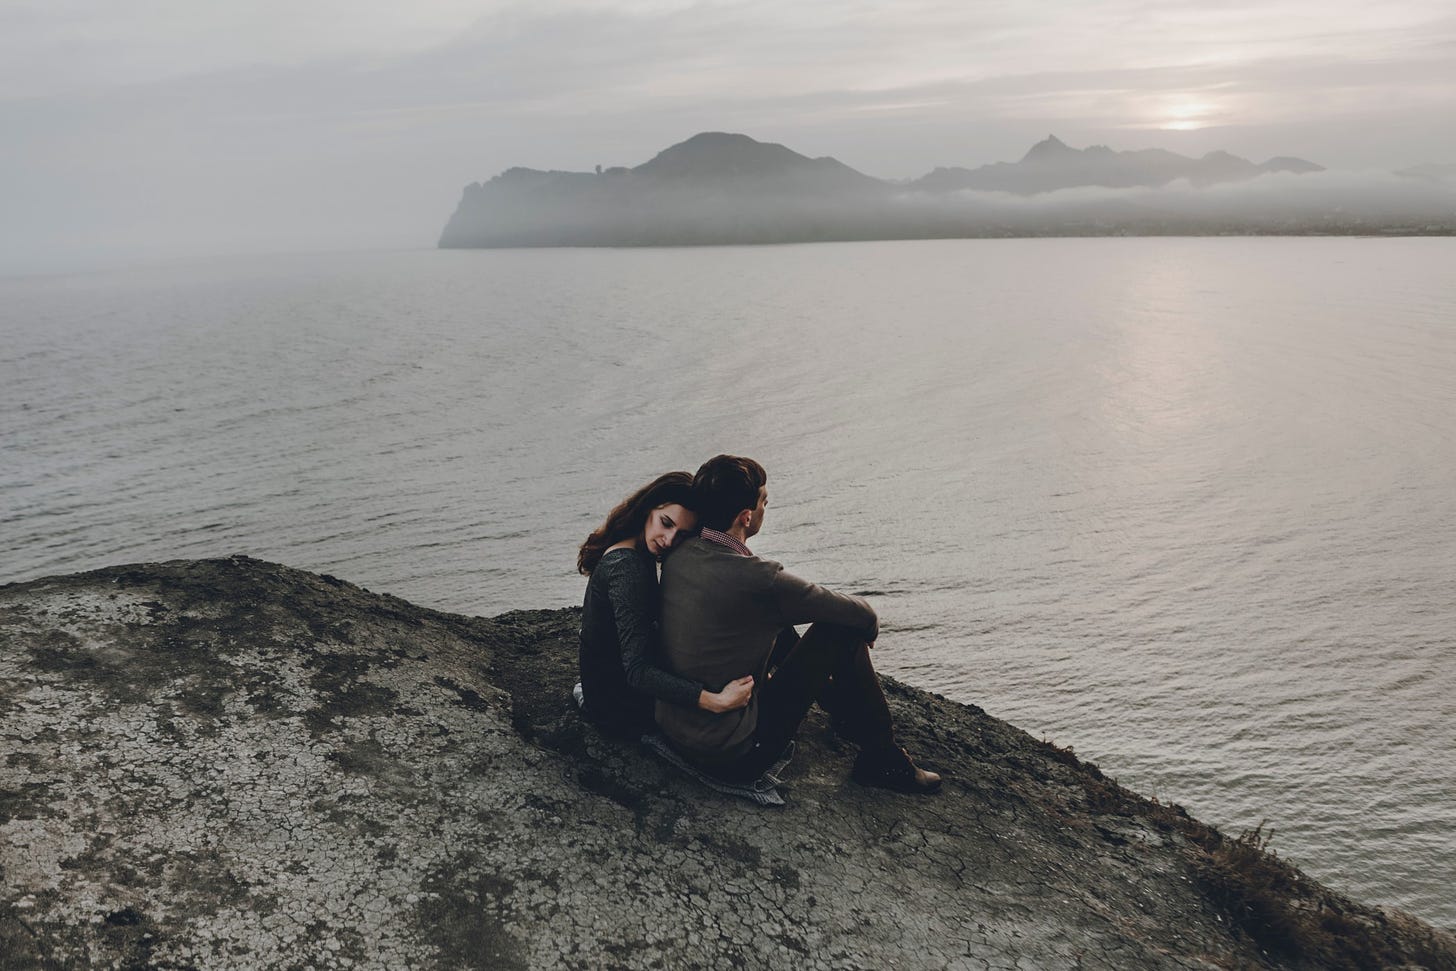 A couple embraces on a cliff overlooking a grey and cloudy sea.